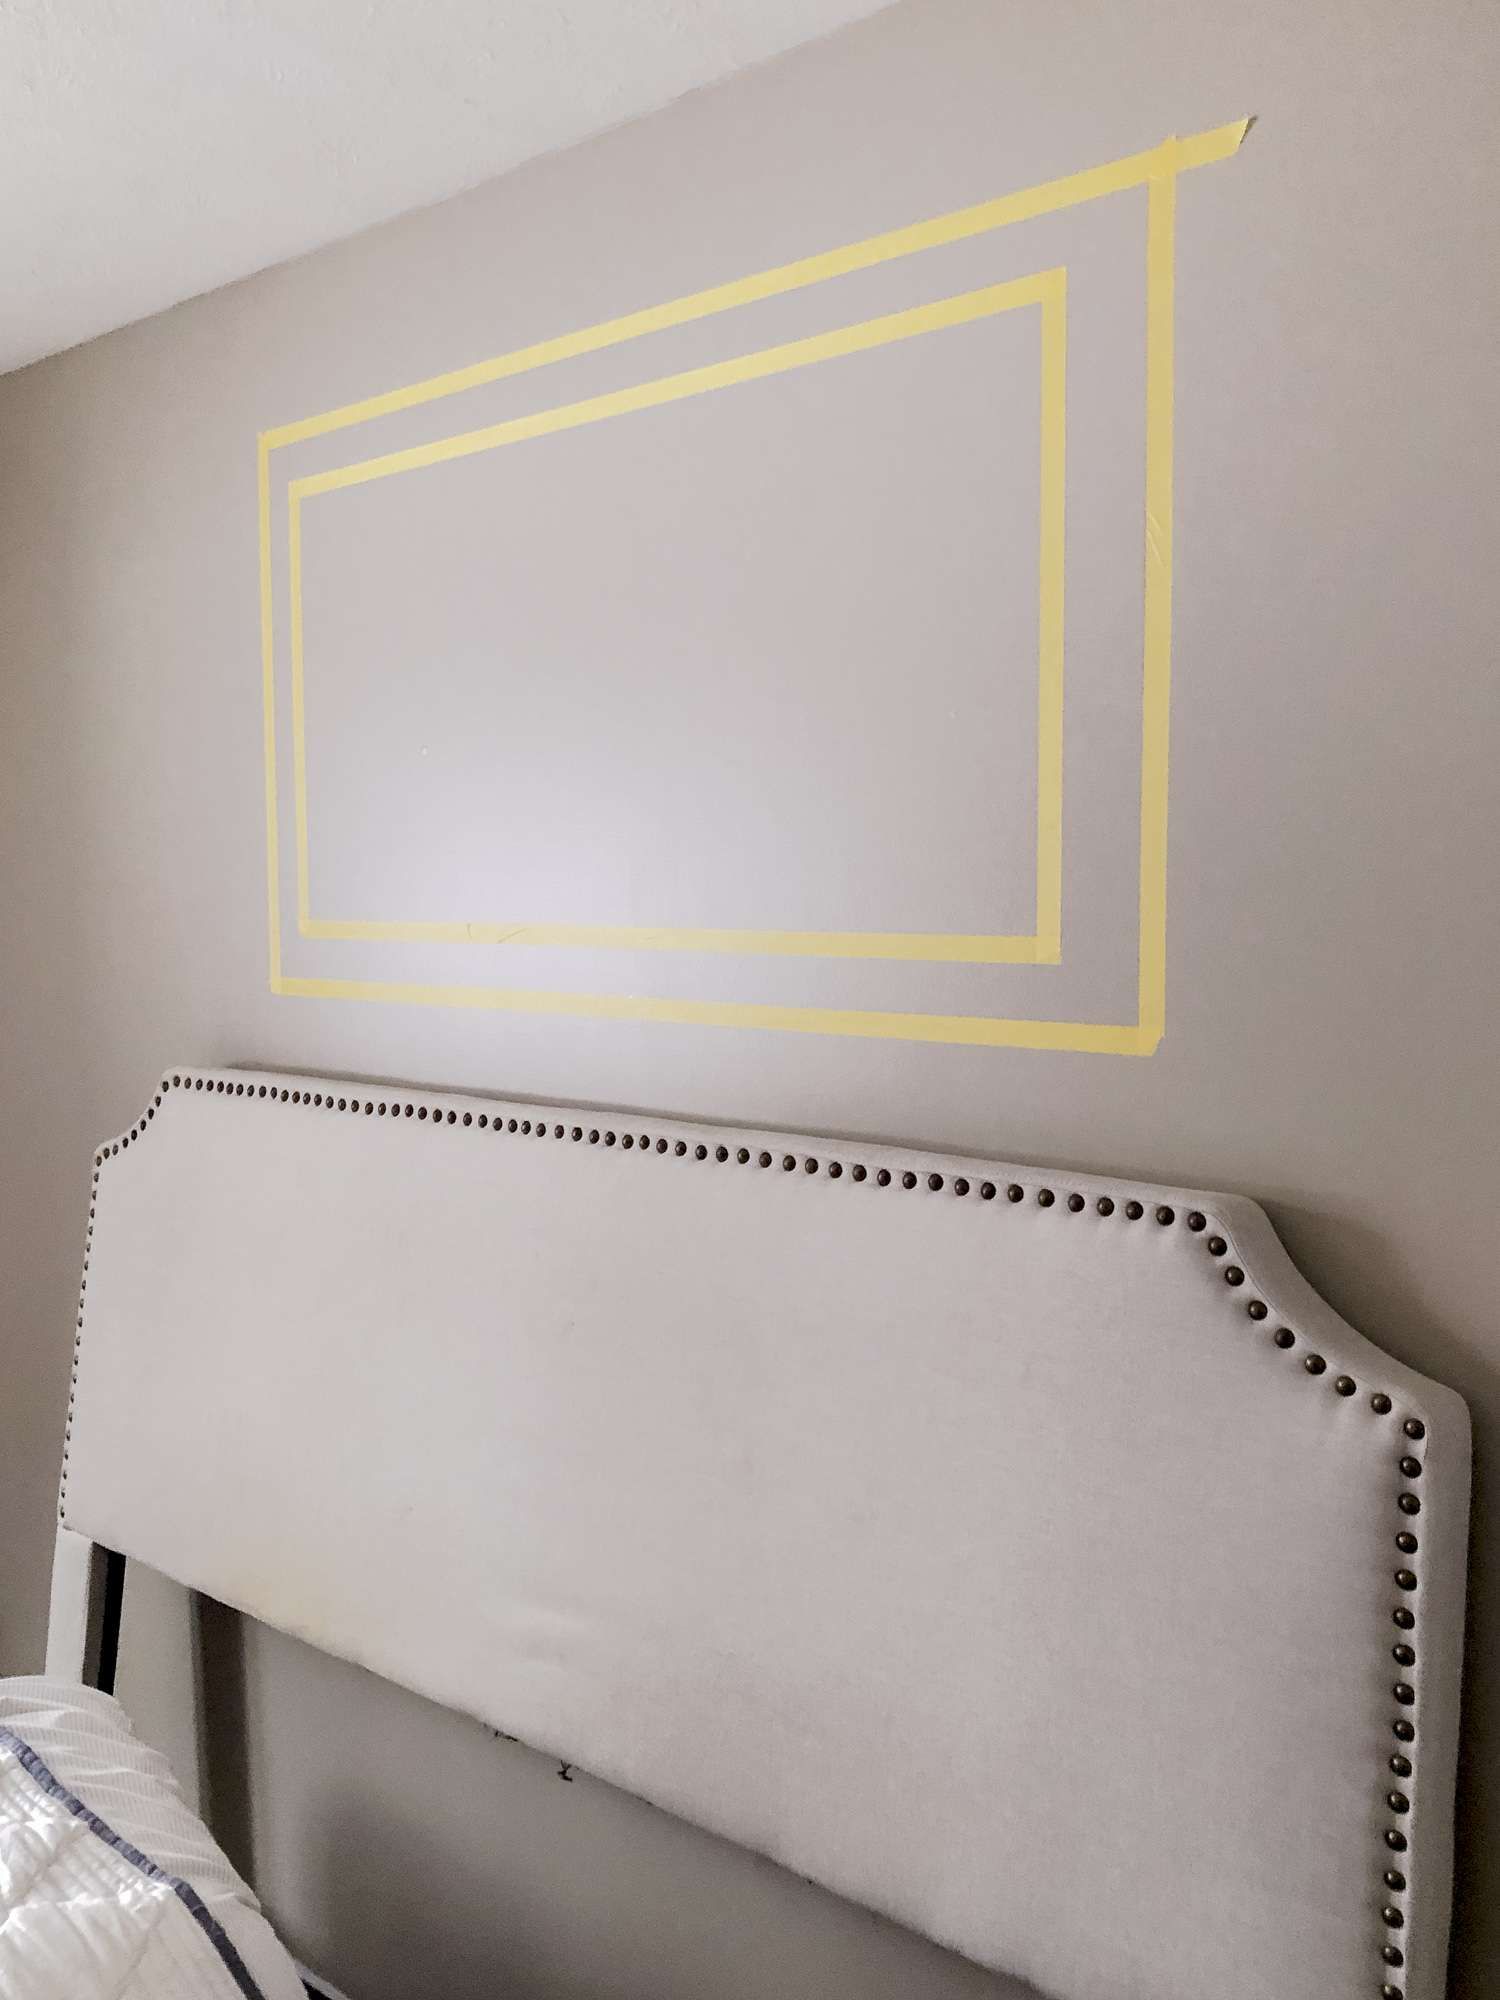 Using Color Block Art To Accentuate Wall Decor – Grace In My Space In Most Current Color Block Wall Art (View 18 of 20)